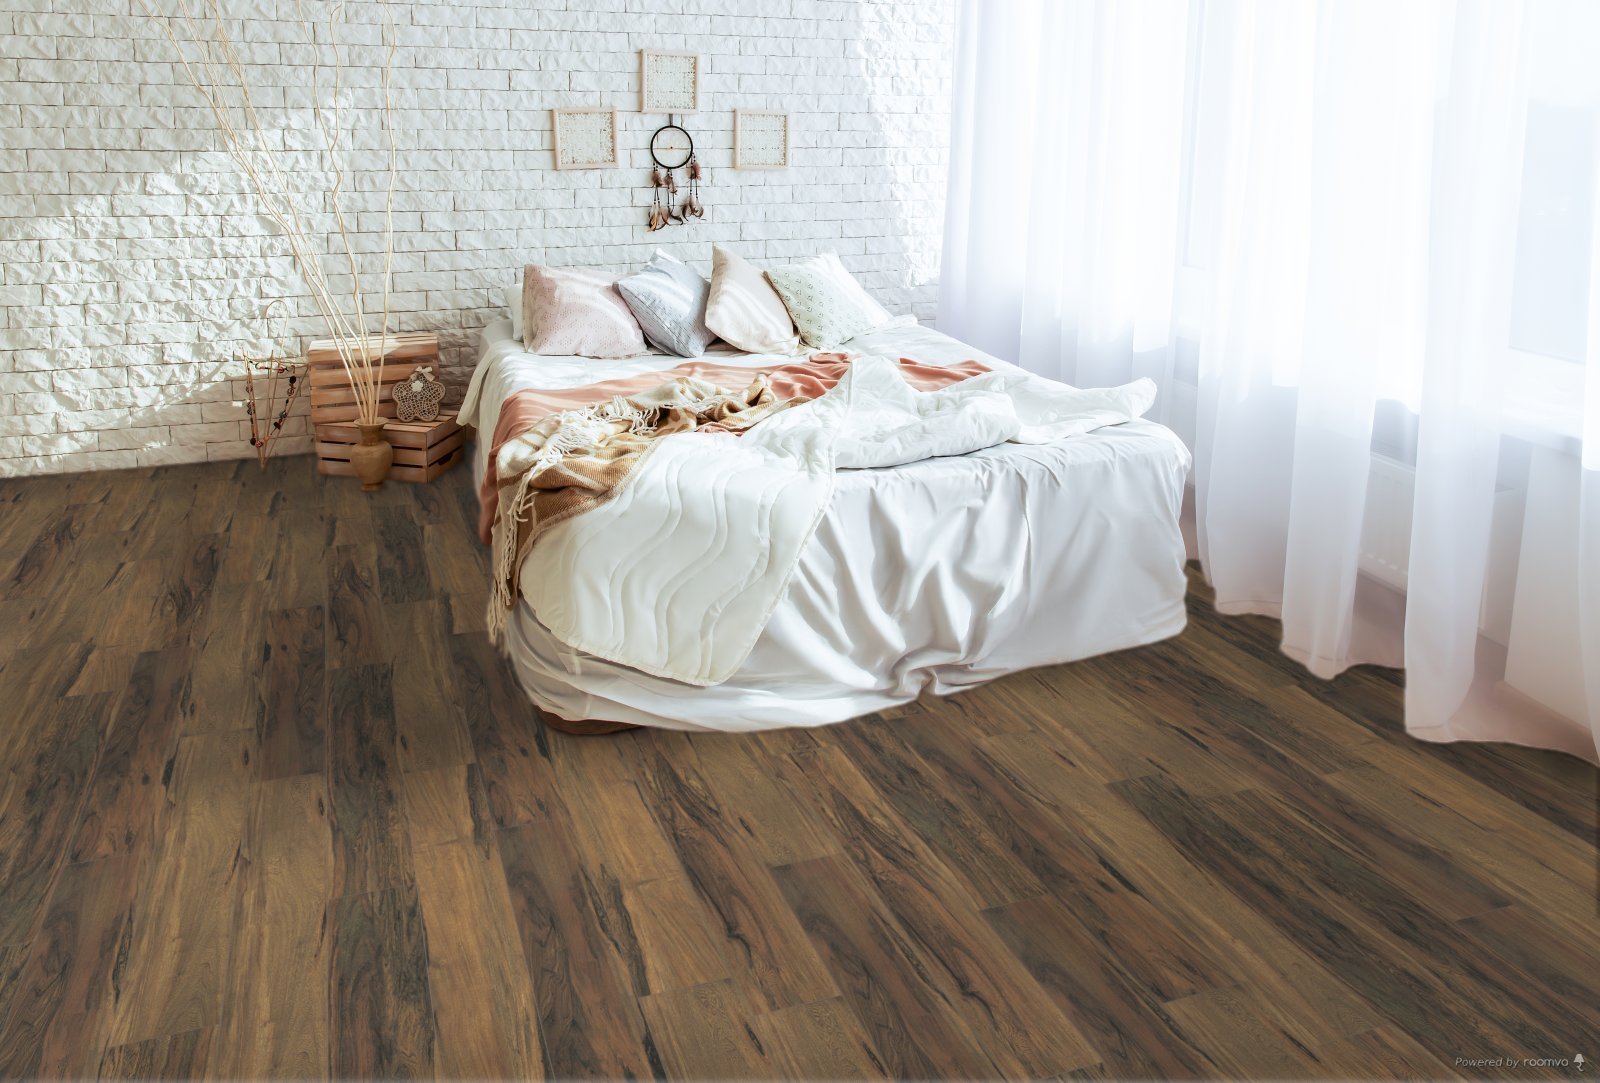 Horizen Flooring presents to you a picture of a quality wide plank Nightfall luxury vinyl plank. NovoCore Q Merengue collection features a wide range of colors & designs that will compliment any interior. Natural wood grain synchronized surface allow for an authentic hardwood look & feel. This collection features a 0.3″ / 7.5 mm overall thickness and a durable 22 mil / 0.55 mm wear layer for residential and commercial applications.